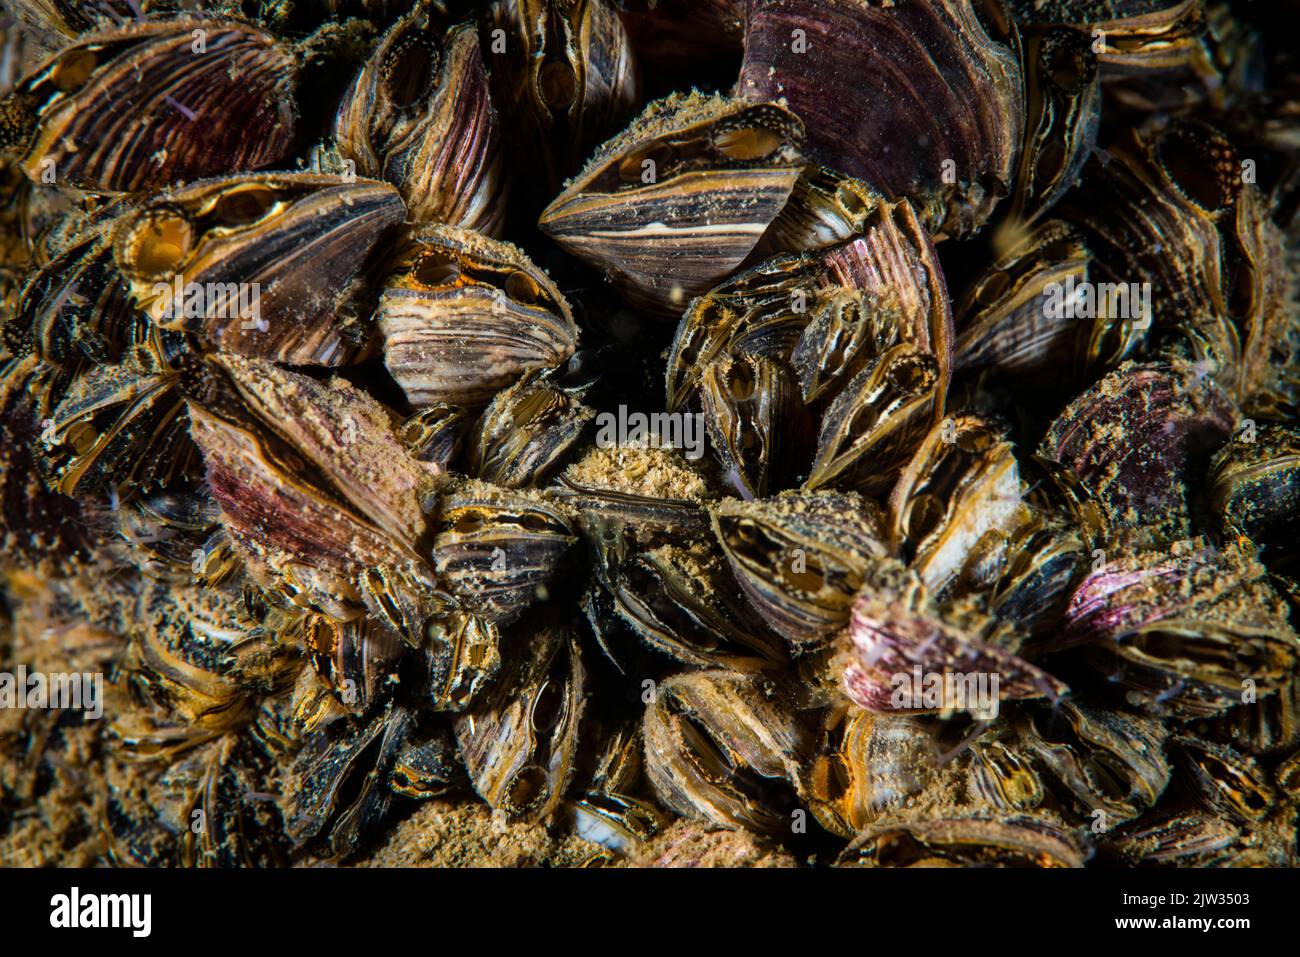 Zebra mussels are an invasive species that has been accidentally introduced to numerous areas including the St. Lawrence River. Stock Photo